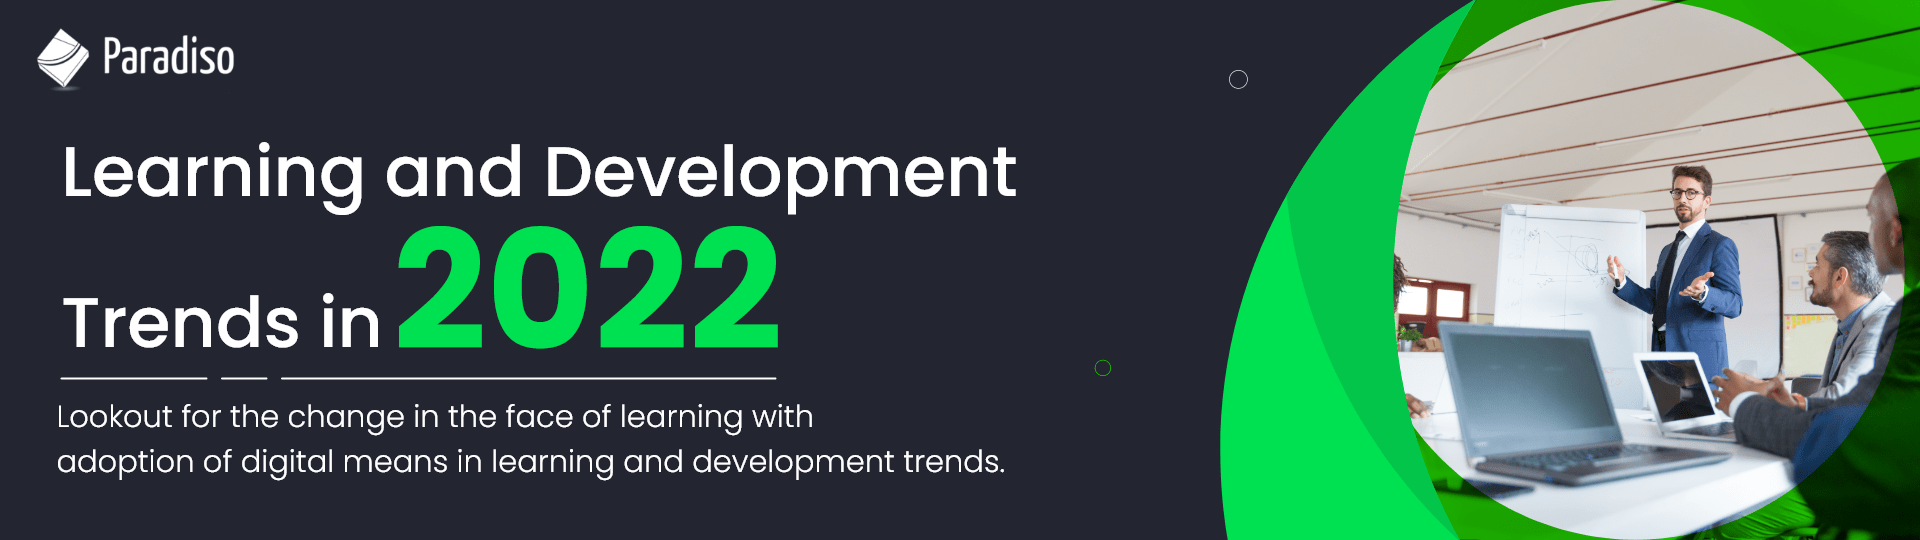 Top 11 Learning & Development to Watch in 2022